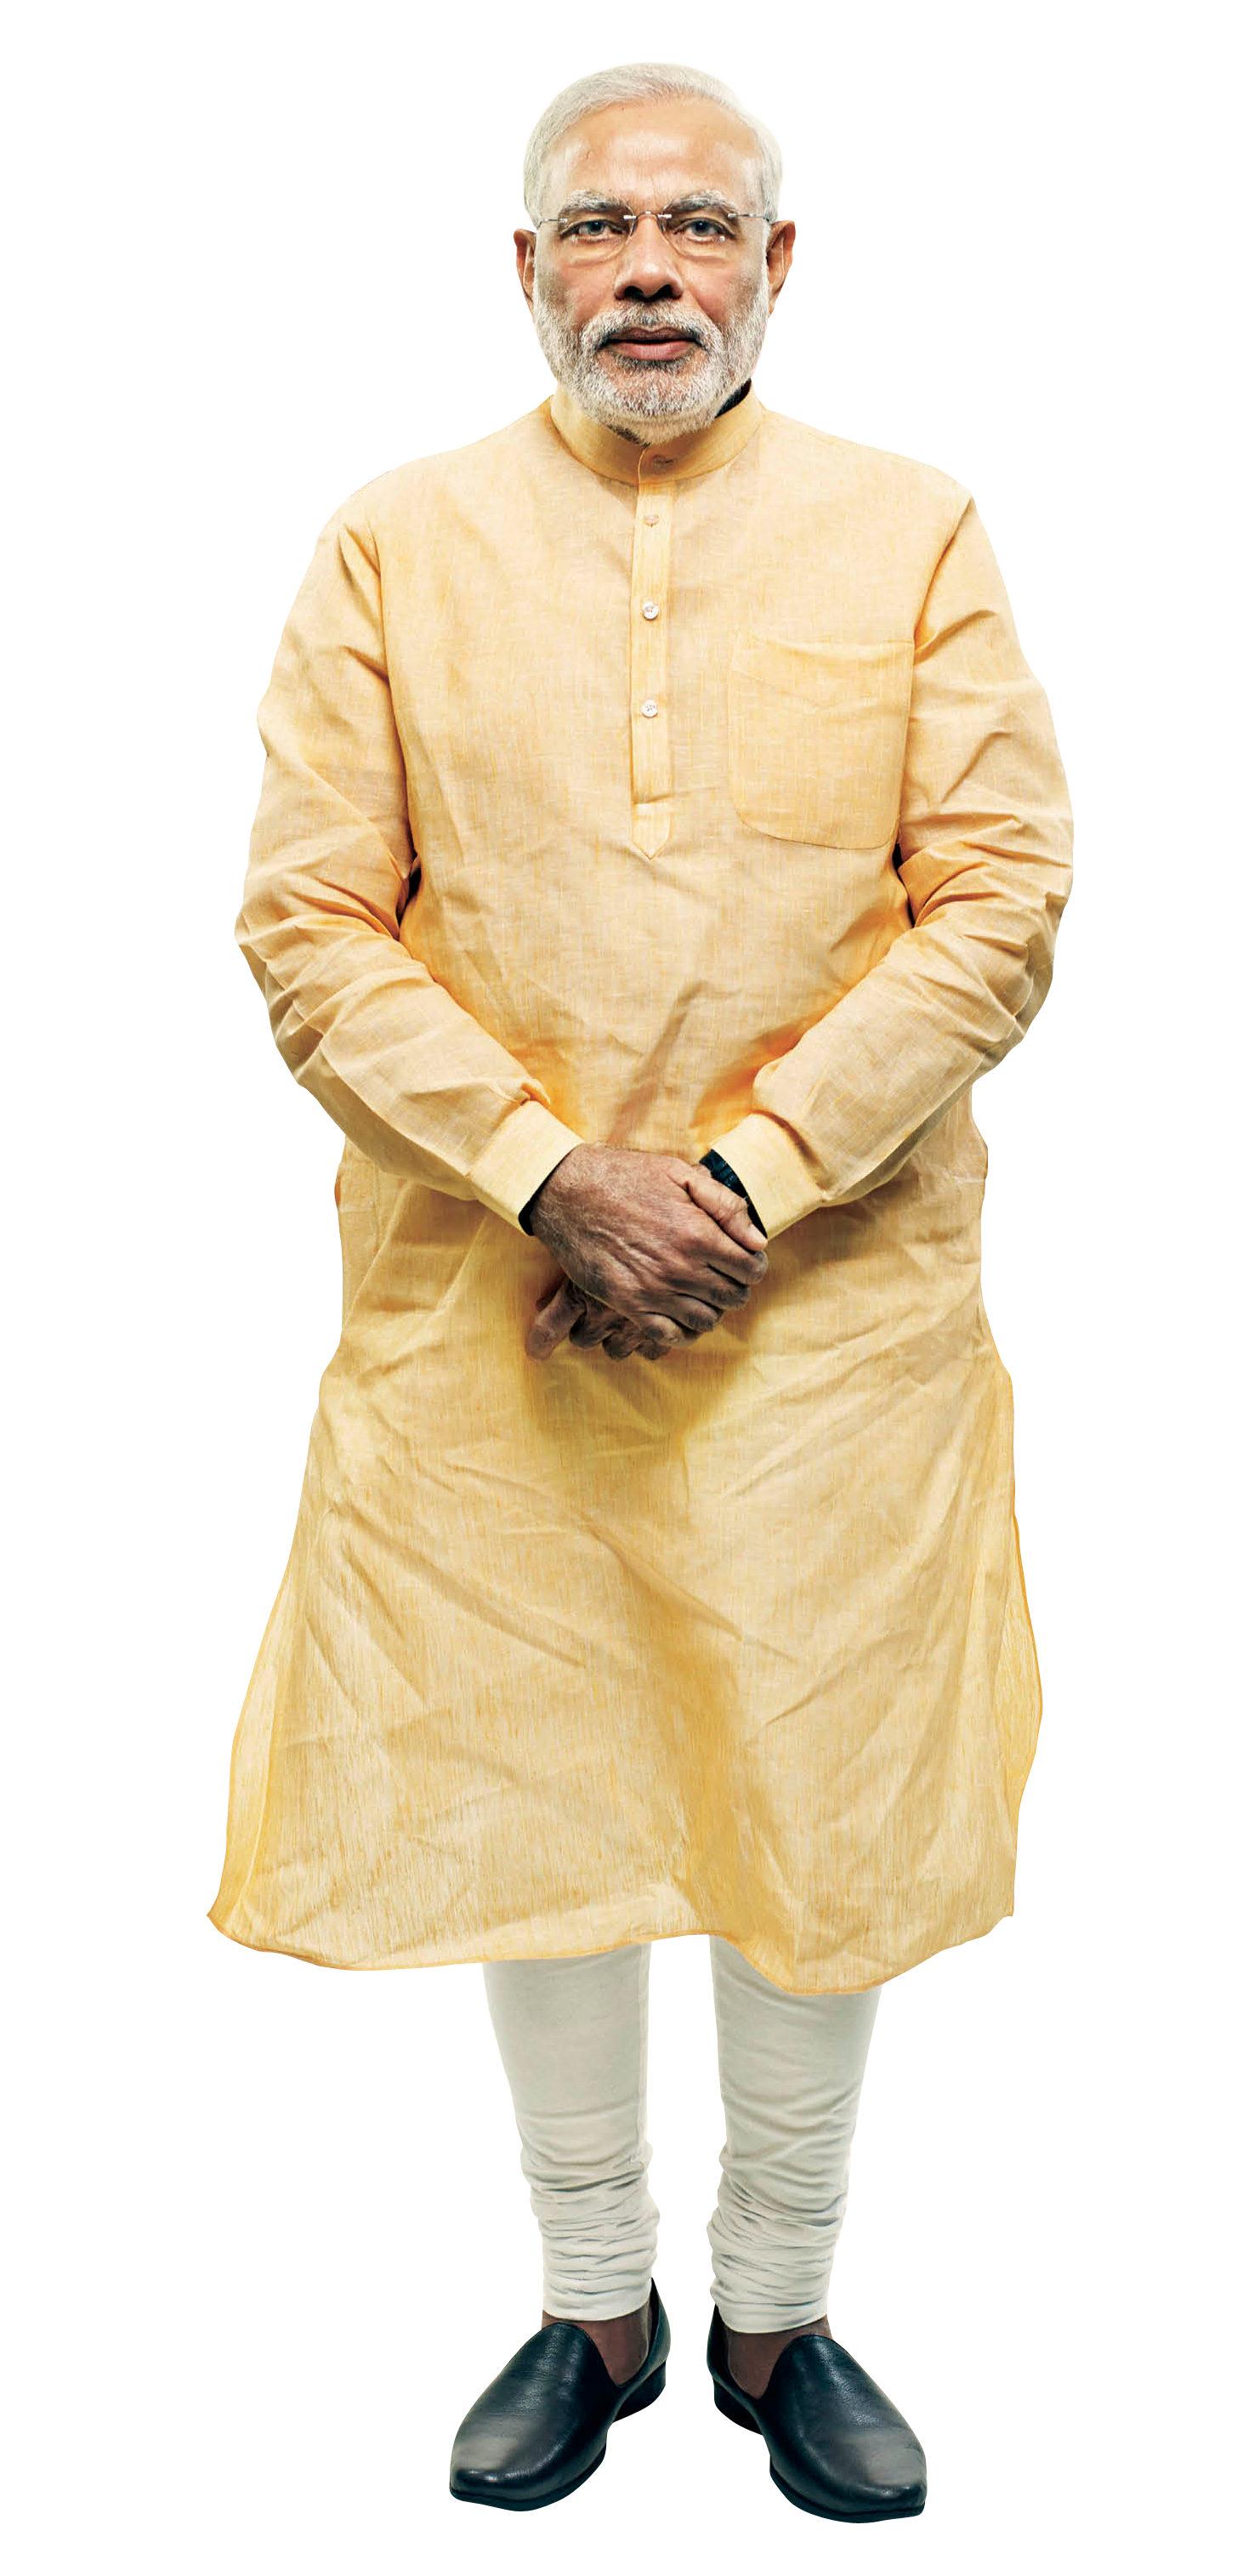 Prime United Of India Narendra States Minister PNG Image